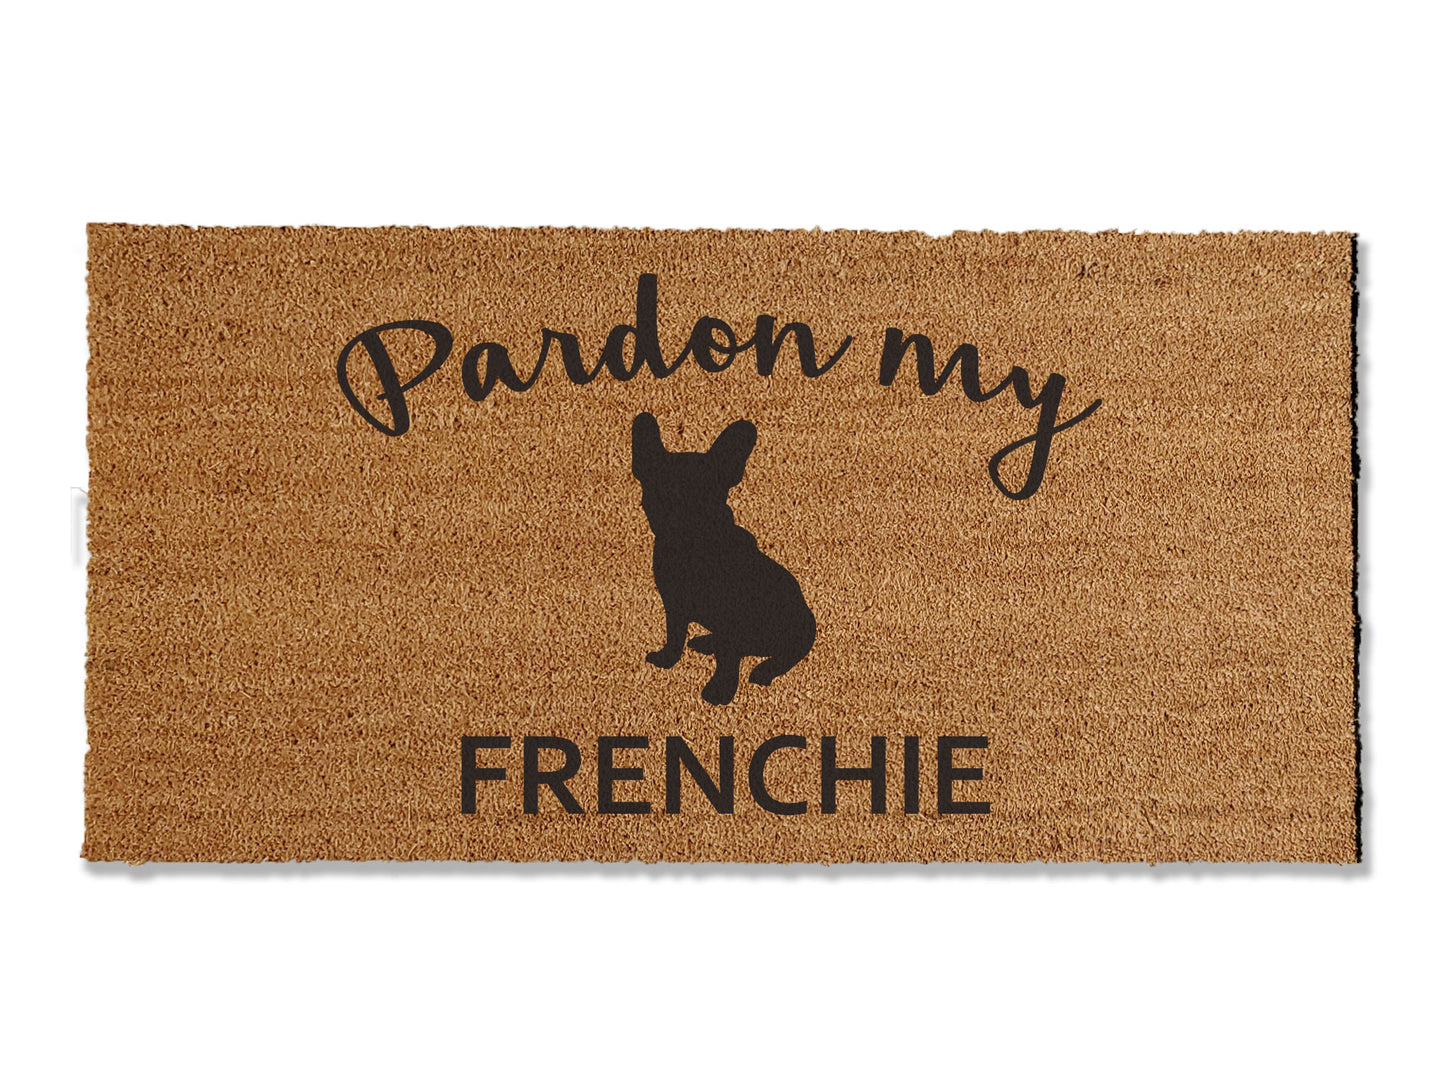 Welcome guests with our coir welcome doormat, featuring a charming French Bulldog that says pardon my french. Available in multiple sizes, this is the perfect gift for Frenchie lovers, adding a touch of charm and humor that effortlessly spruces up your entryway.